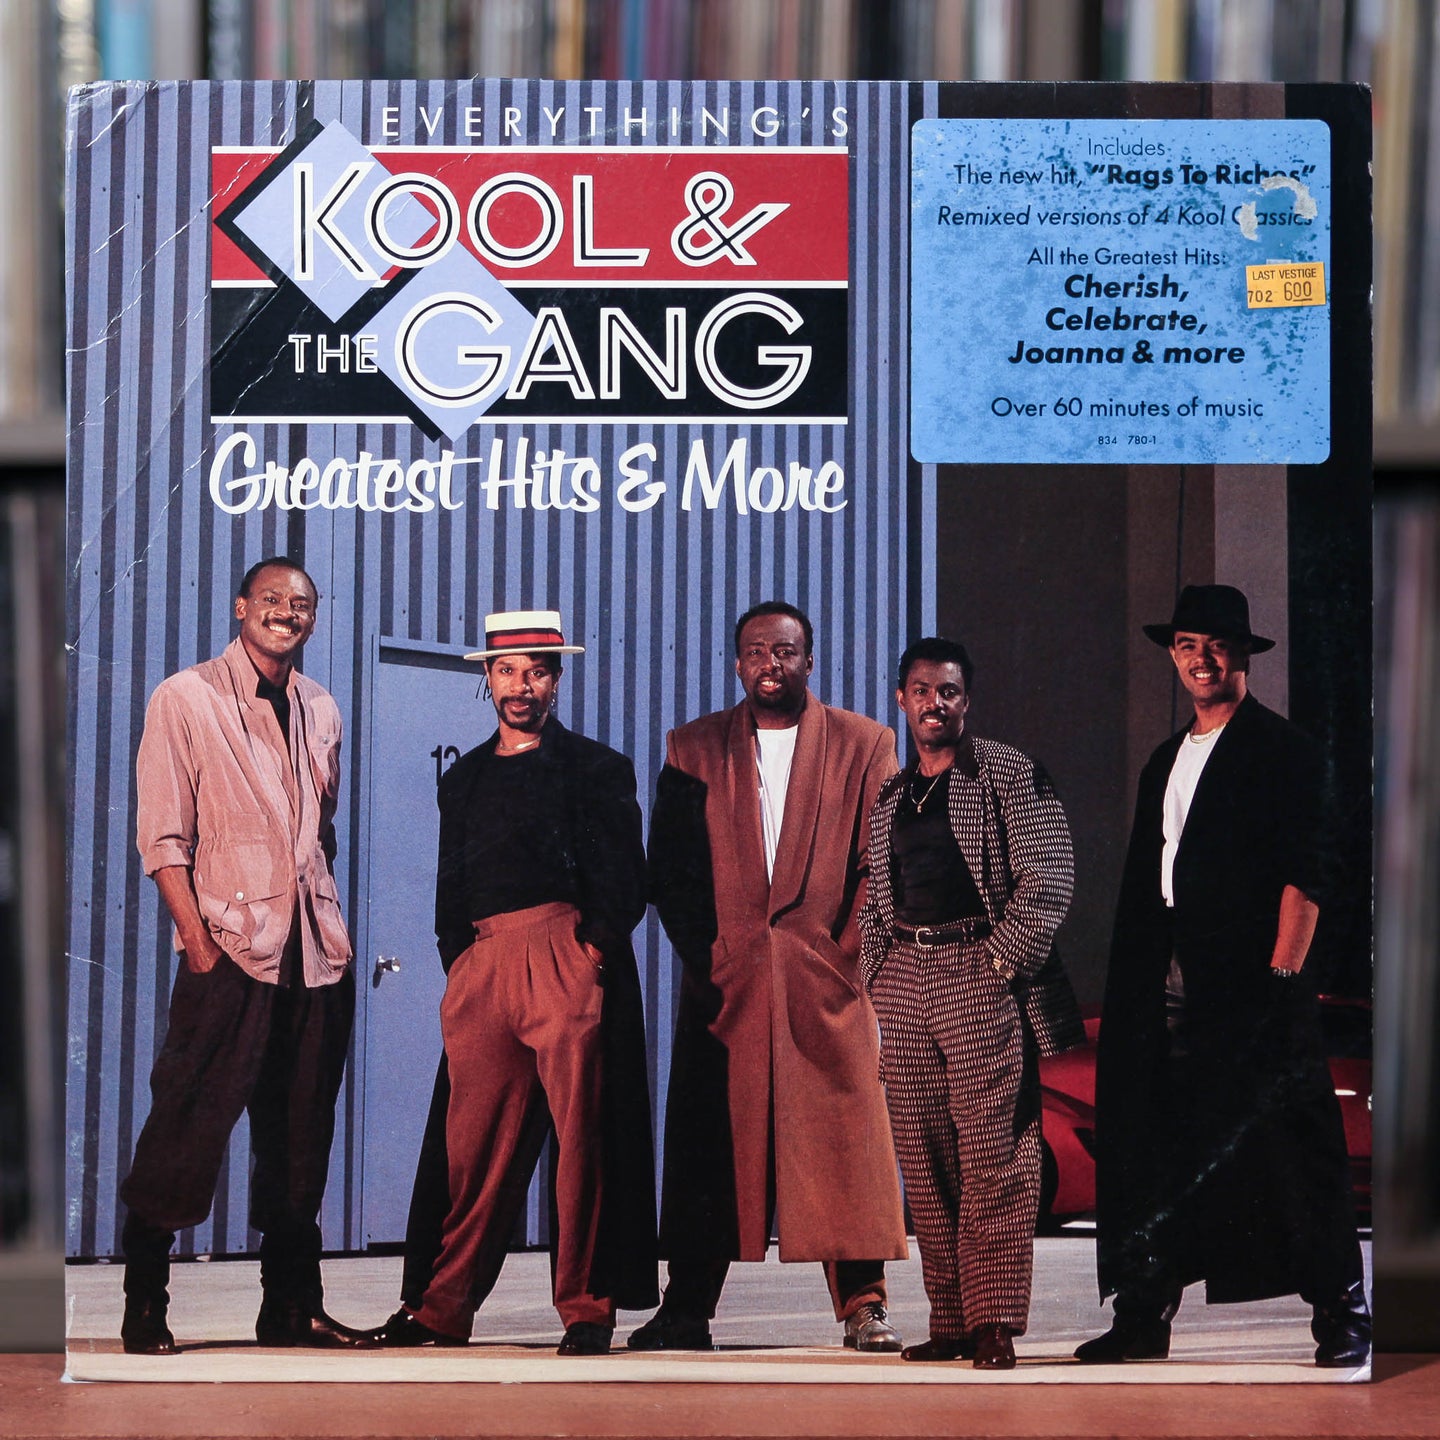 Kool & The Gang - Everything Is Kool & The Gang - Greatest Hits & More - RARE PROMO - 1988 Mercury, VG/EX